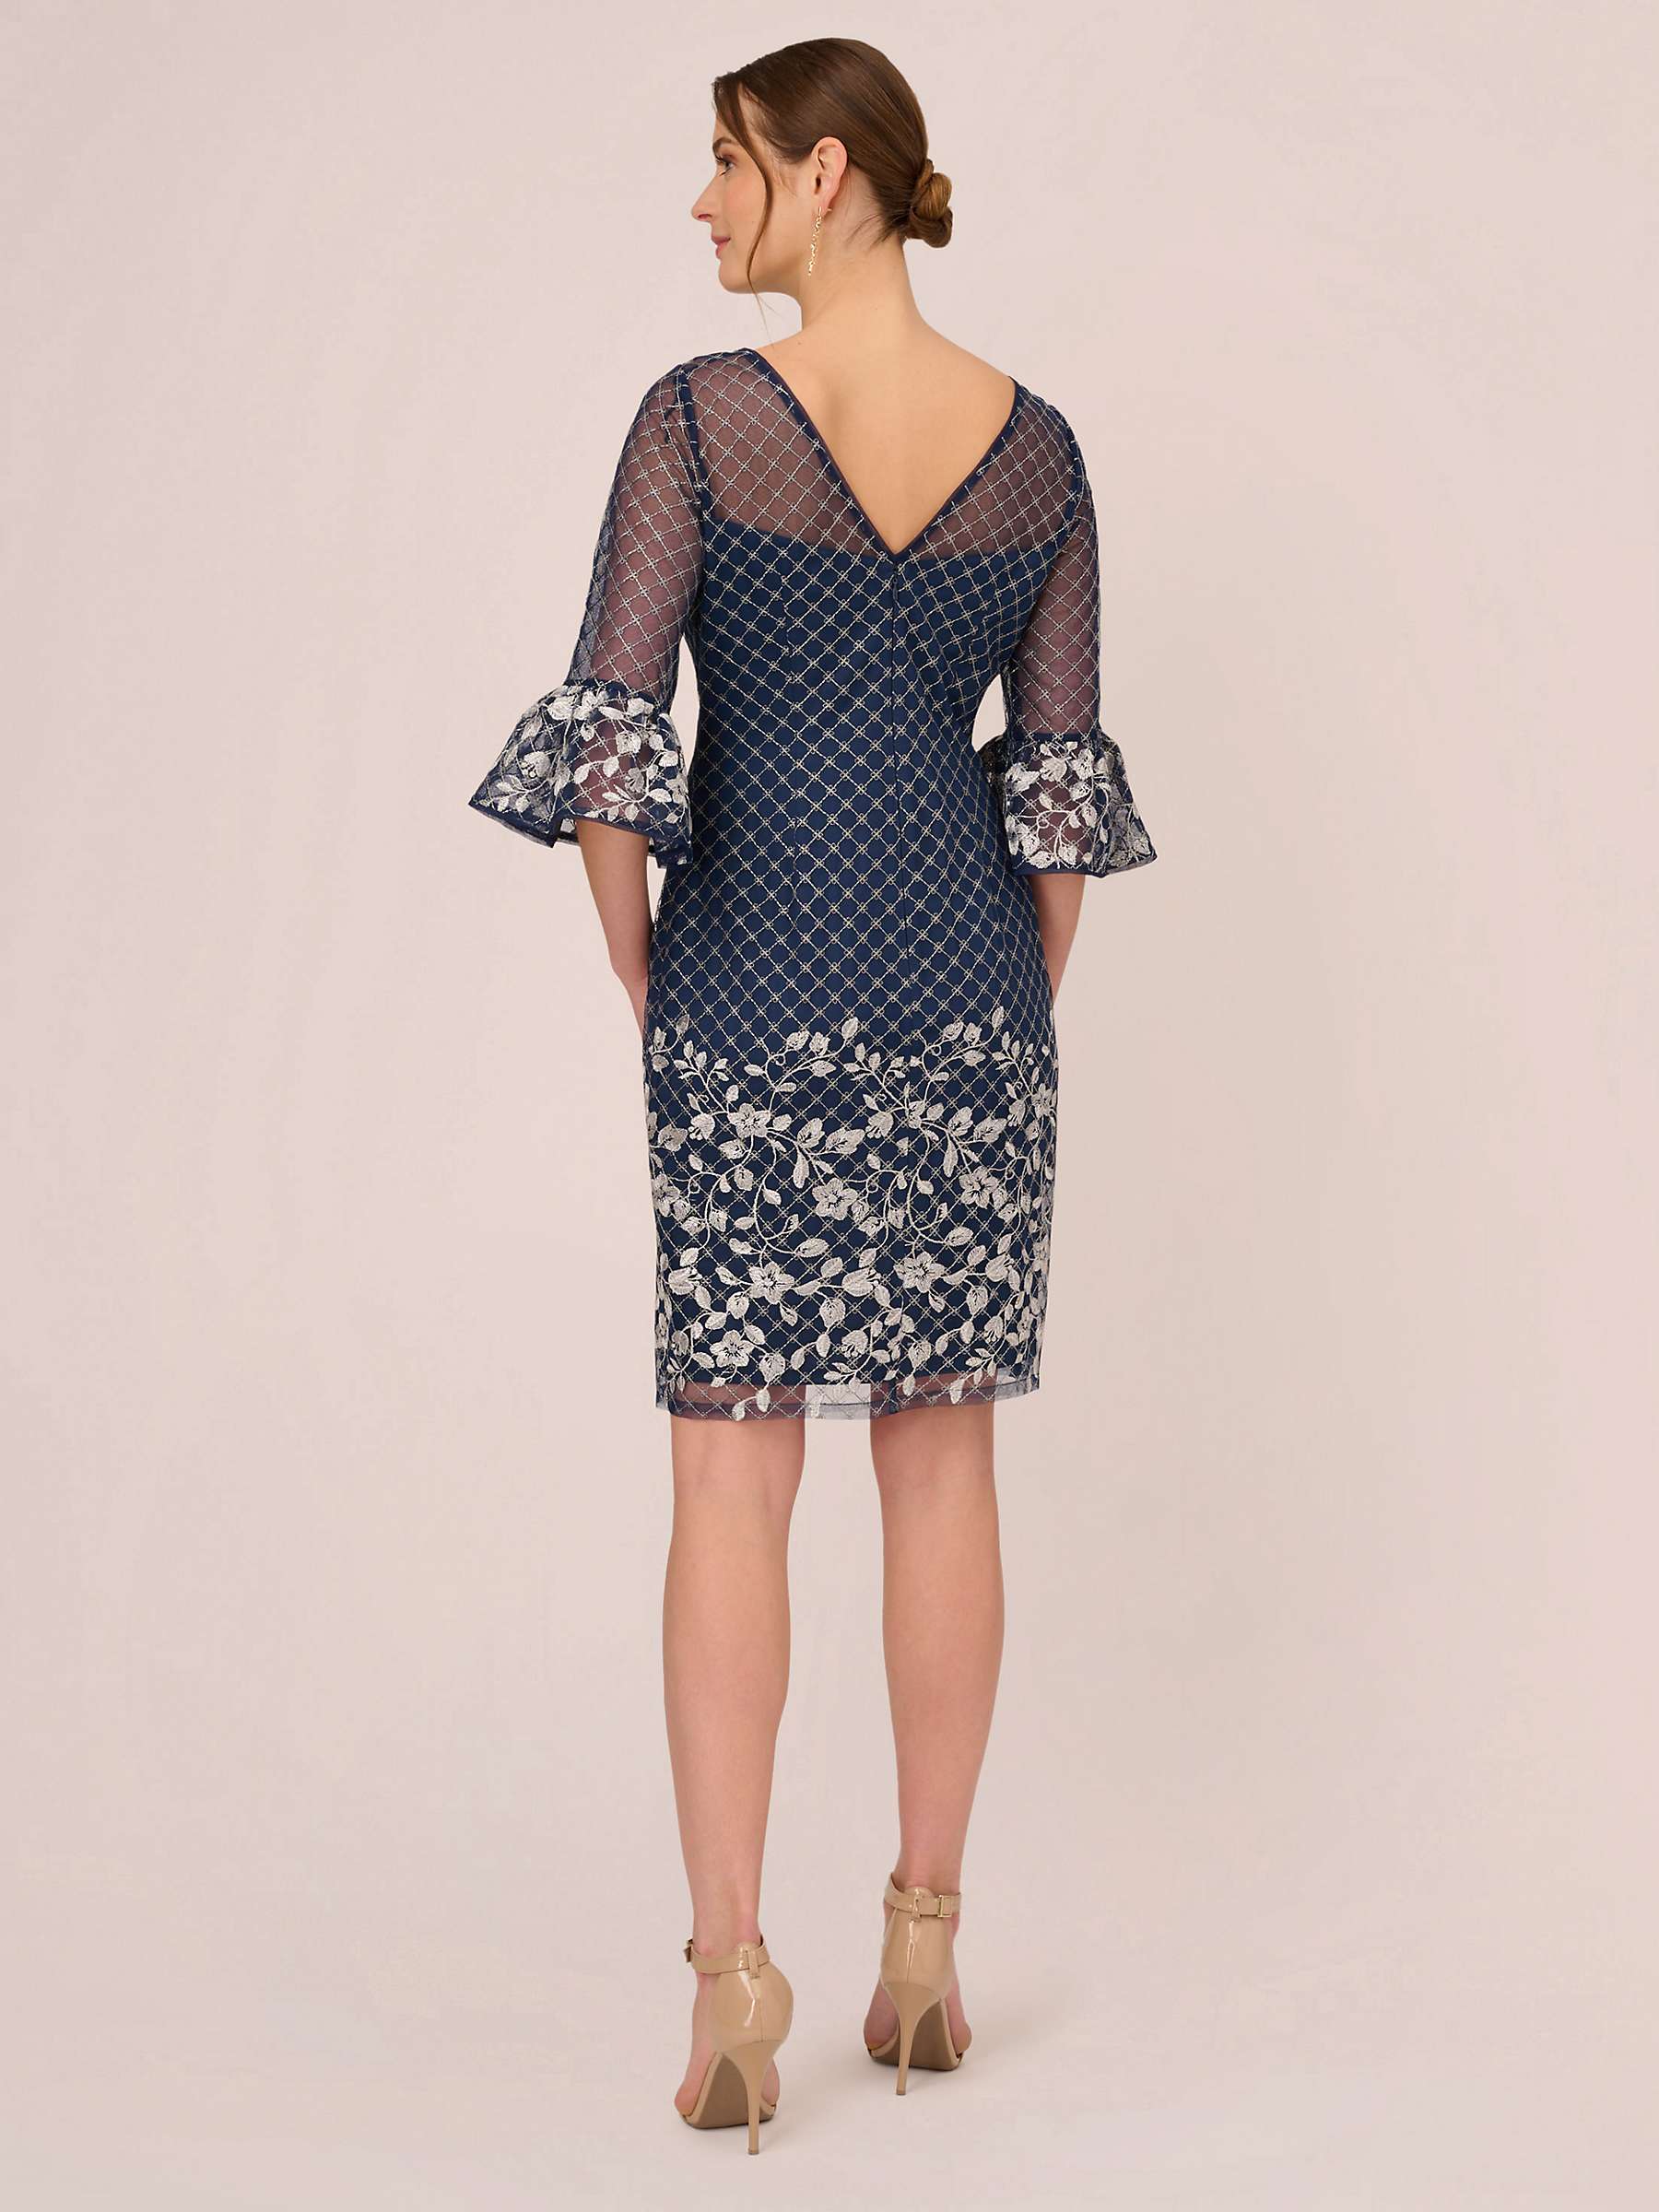 Buy Adrianna Papell Floral Embroidery Border Dress, Navy/Ivory Online at johnlewis.com